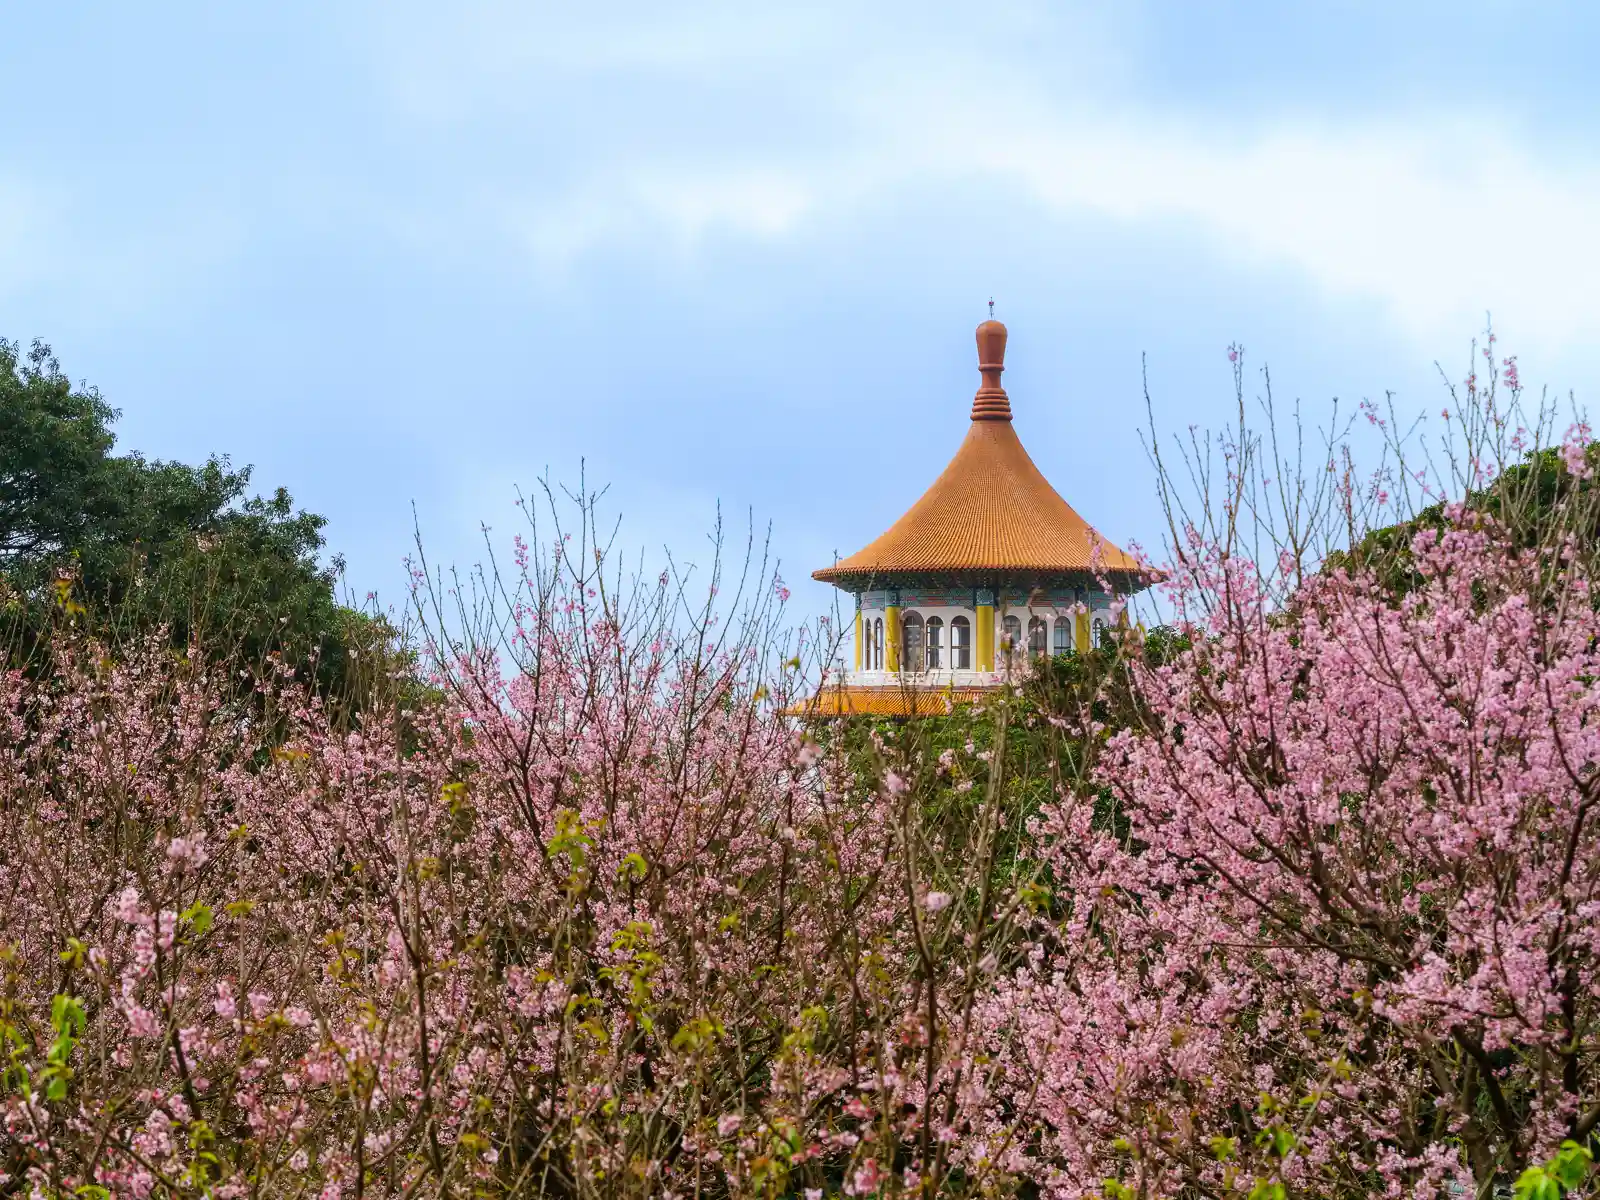 Cherry blossoms can be seen in the gardens with the Tiantan in the background.